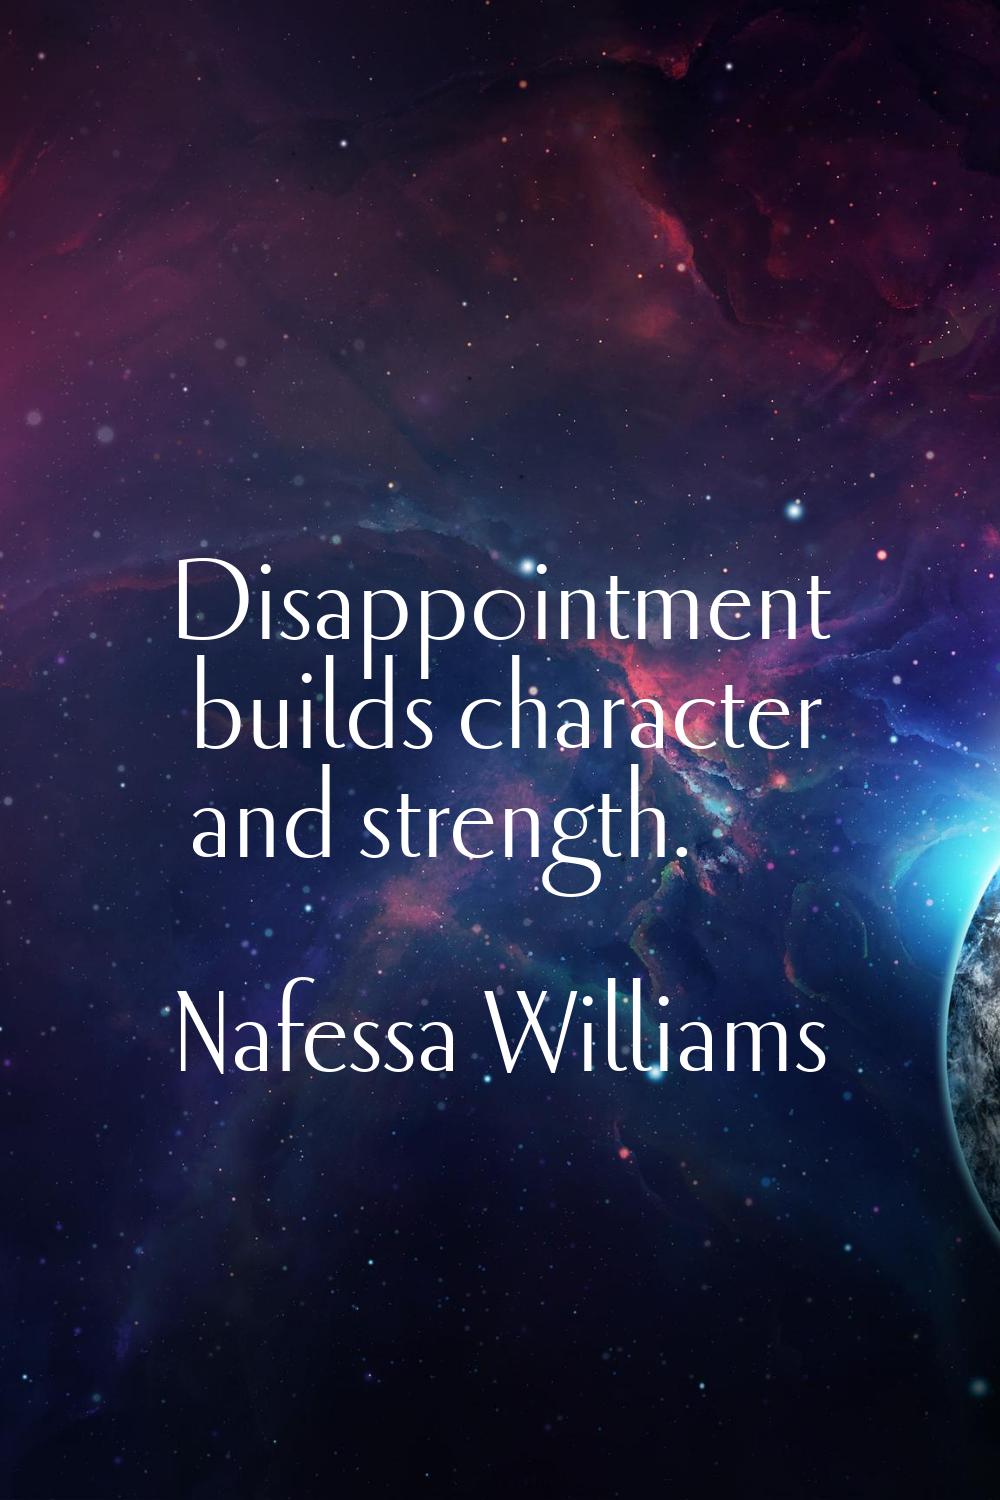 Disappointment builds character and strength.